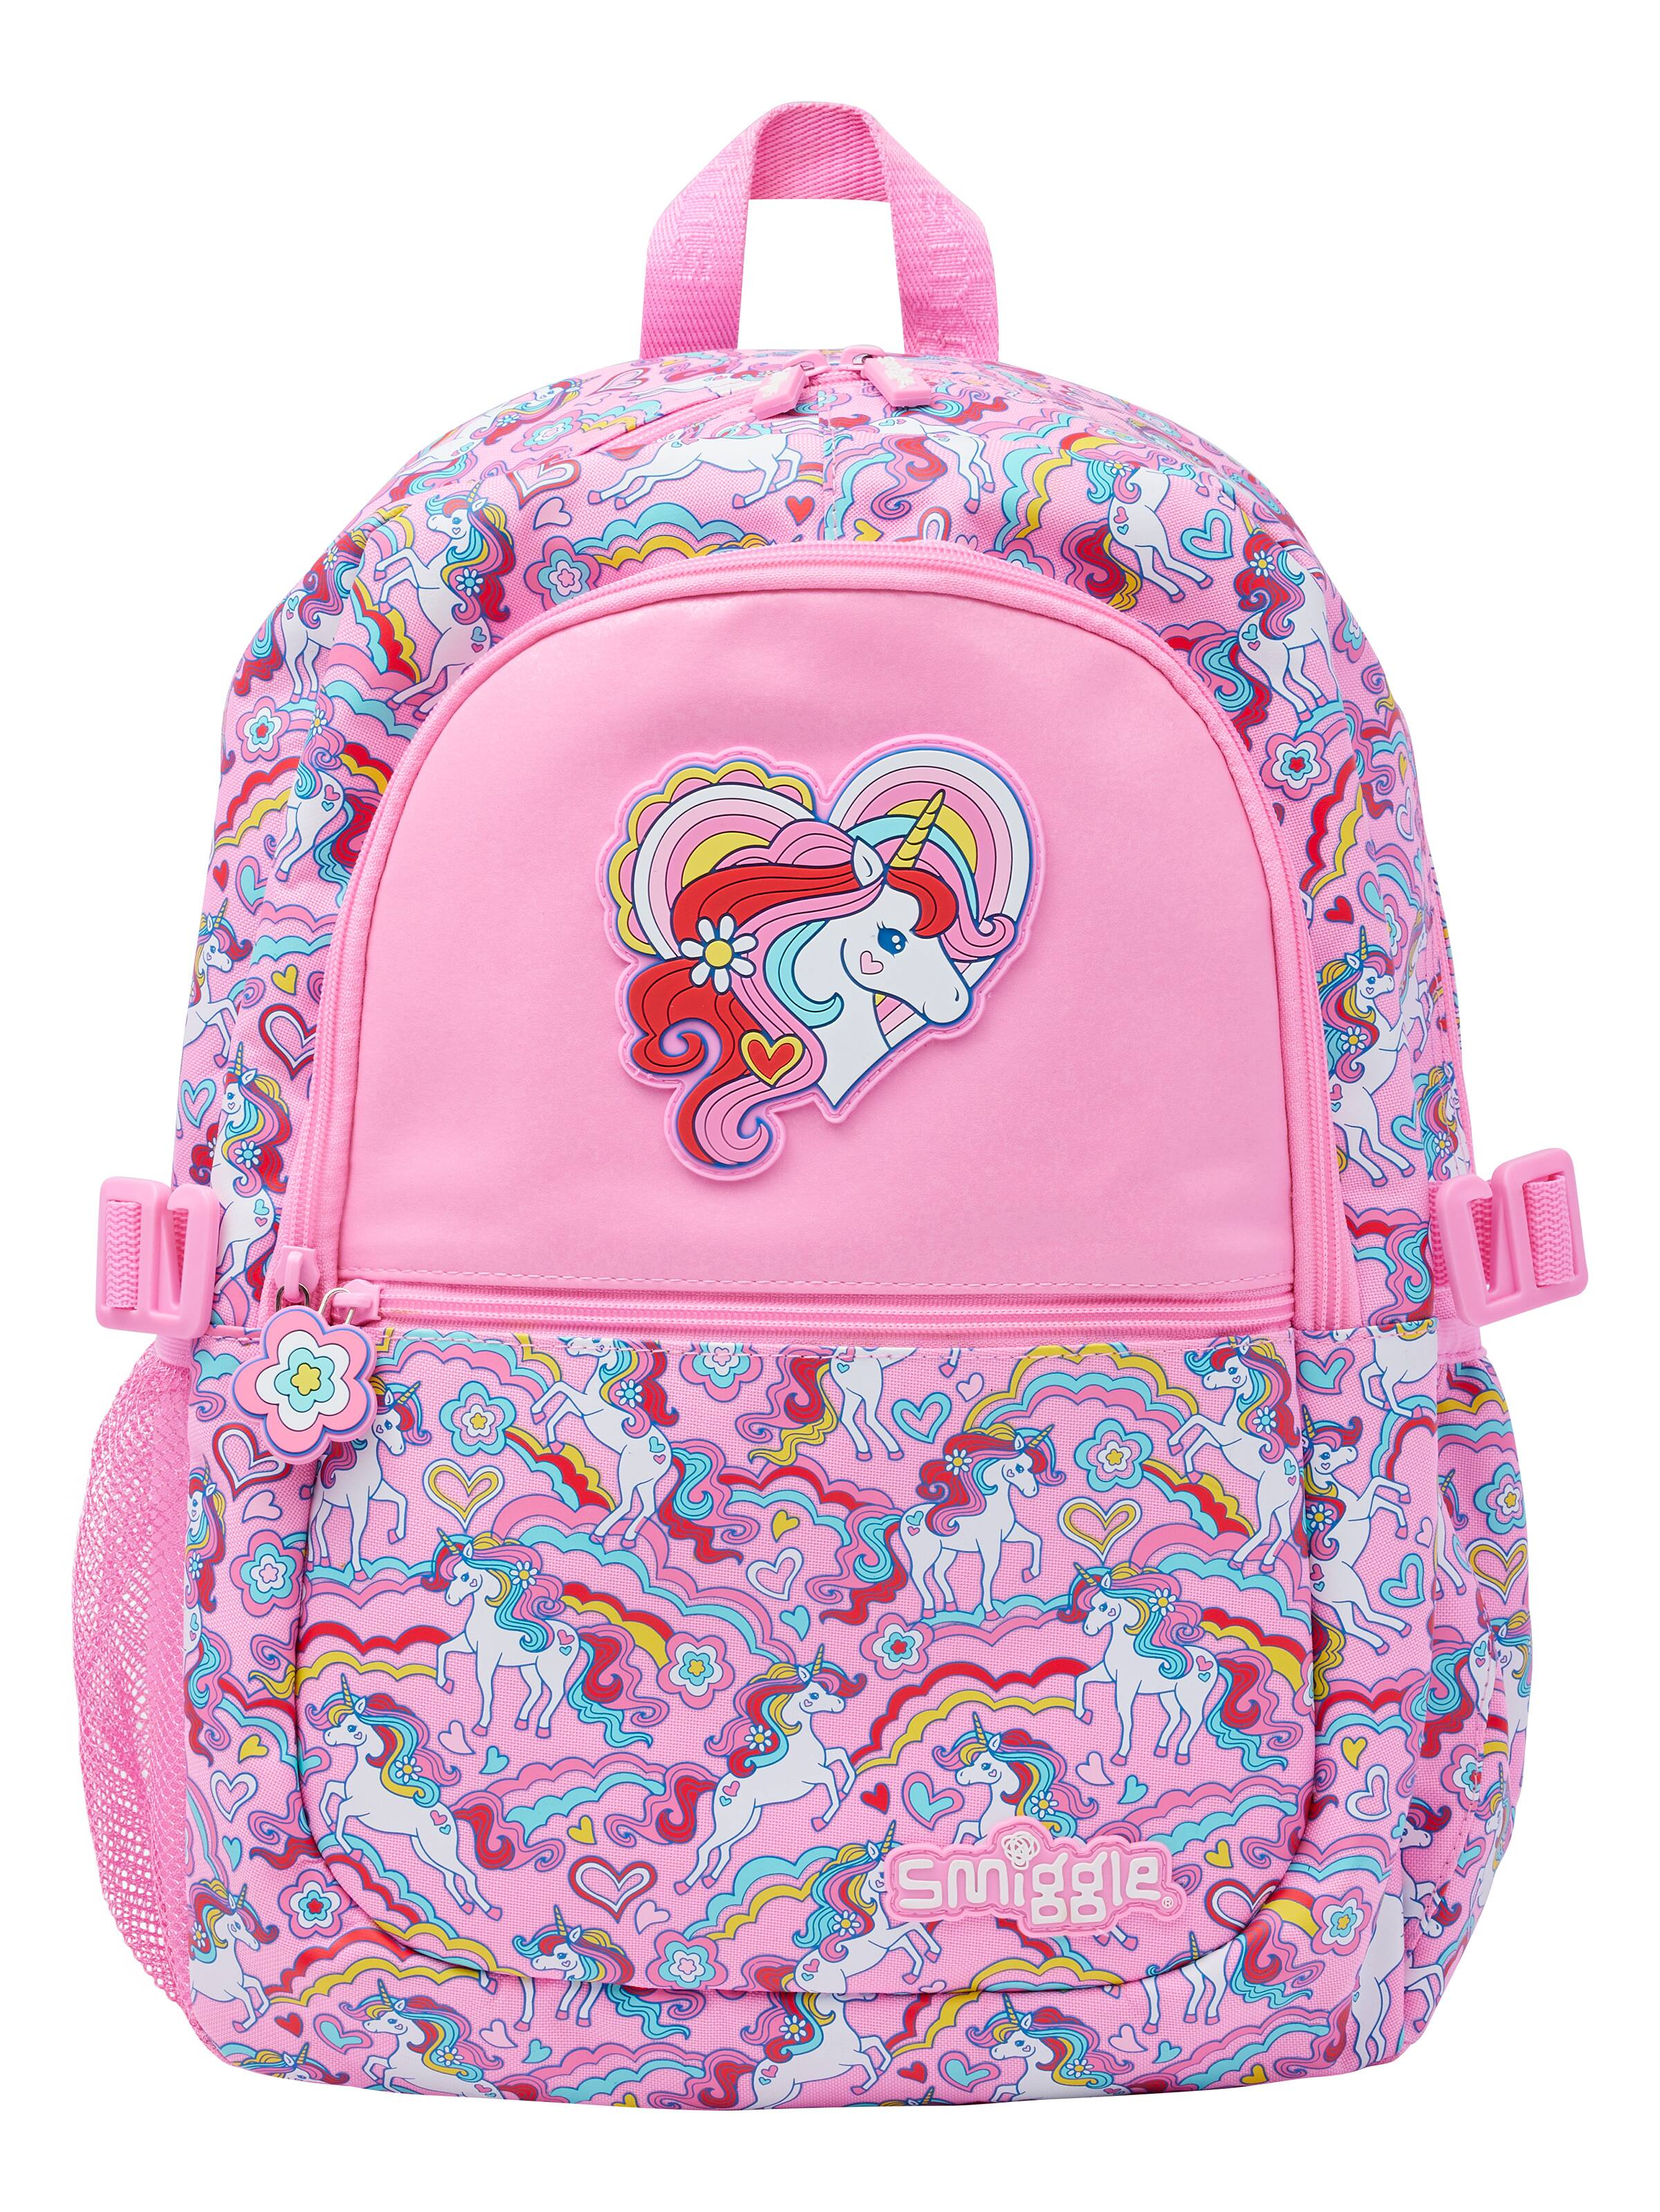 Smiggle Online Store in Thailand 